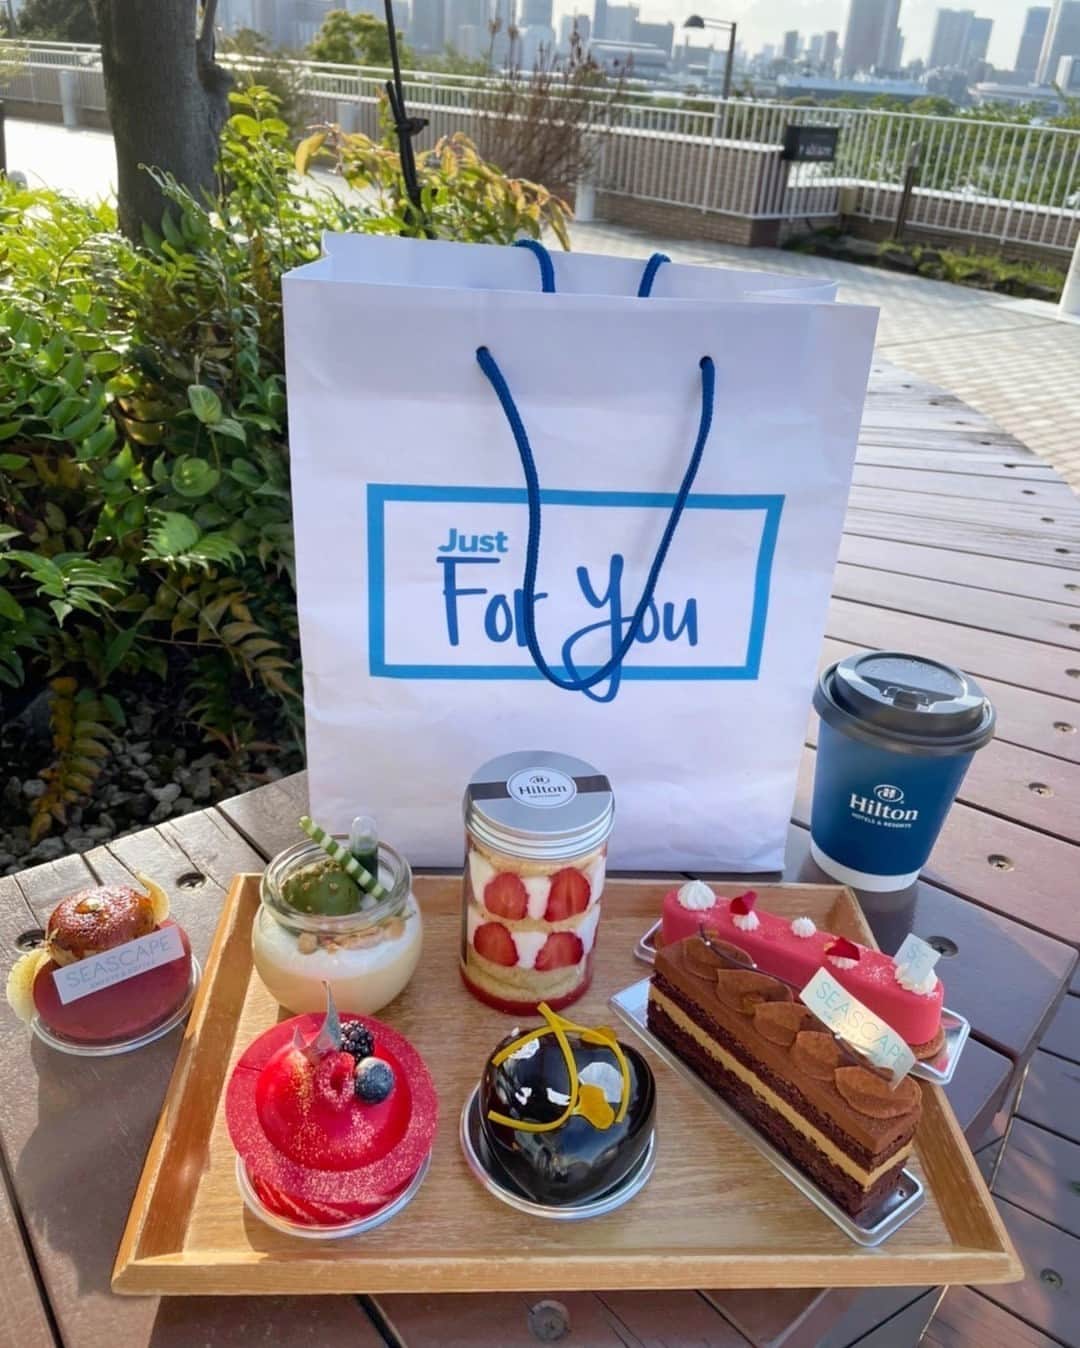 Hilton Tokyo Odaiba ヒルトン東京お台場のインスタグラム：「日中は暖かく、テラス席が心地よい季節になってきました☀️  天気の良い日には、テイクアウトショップ「シースケープ　スイーツ&コーヒー」の旬のフルーツをふんだんに使ったシェフ自慢のスイーツをテイクアウトして、外でピクニック気分を味わってみてはいかがでしょうか？🍰🍴  The warm and inviting terrace season has arrived, and the perfect place to bask in the sunshine is at our "Seascape Sweets & Coffee" takeout shop! ☀️ On a beautiful day, why not treat yourself to one of our chef's delectable desserts made with seasonal fruits, and enjoy a lovely picnic outside? 🍰🍴  Take in the breathtaking scenery while savoring the taste of our gourmet treats, and immerse yourself in the serene ambiance of our luxury establishment. Don't miss out on the chance to indulge in a moment of pure bliss at Seascape Sweets & Coffee!  #ヒルトン東京お台場 #hiltontokyoodaiba」